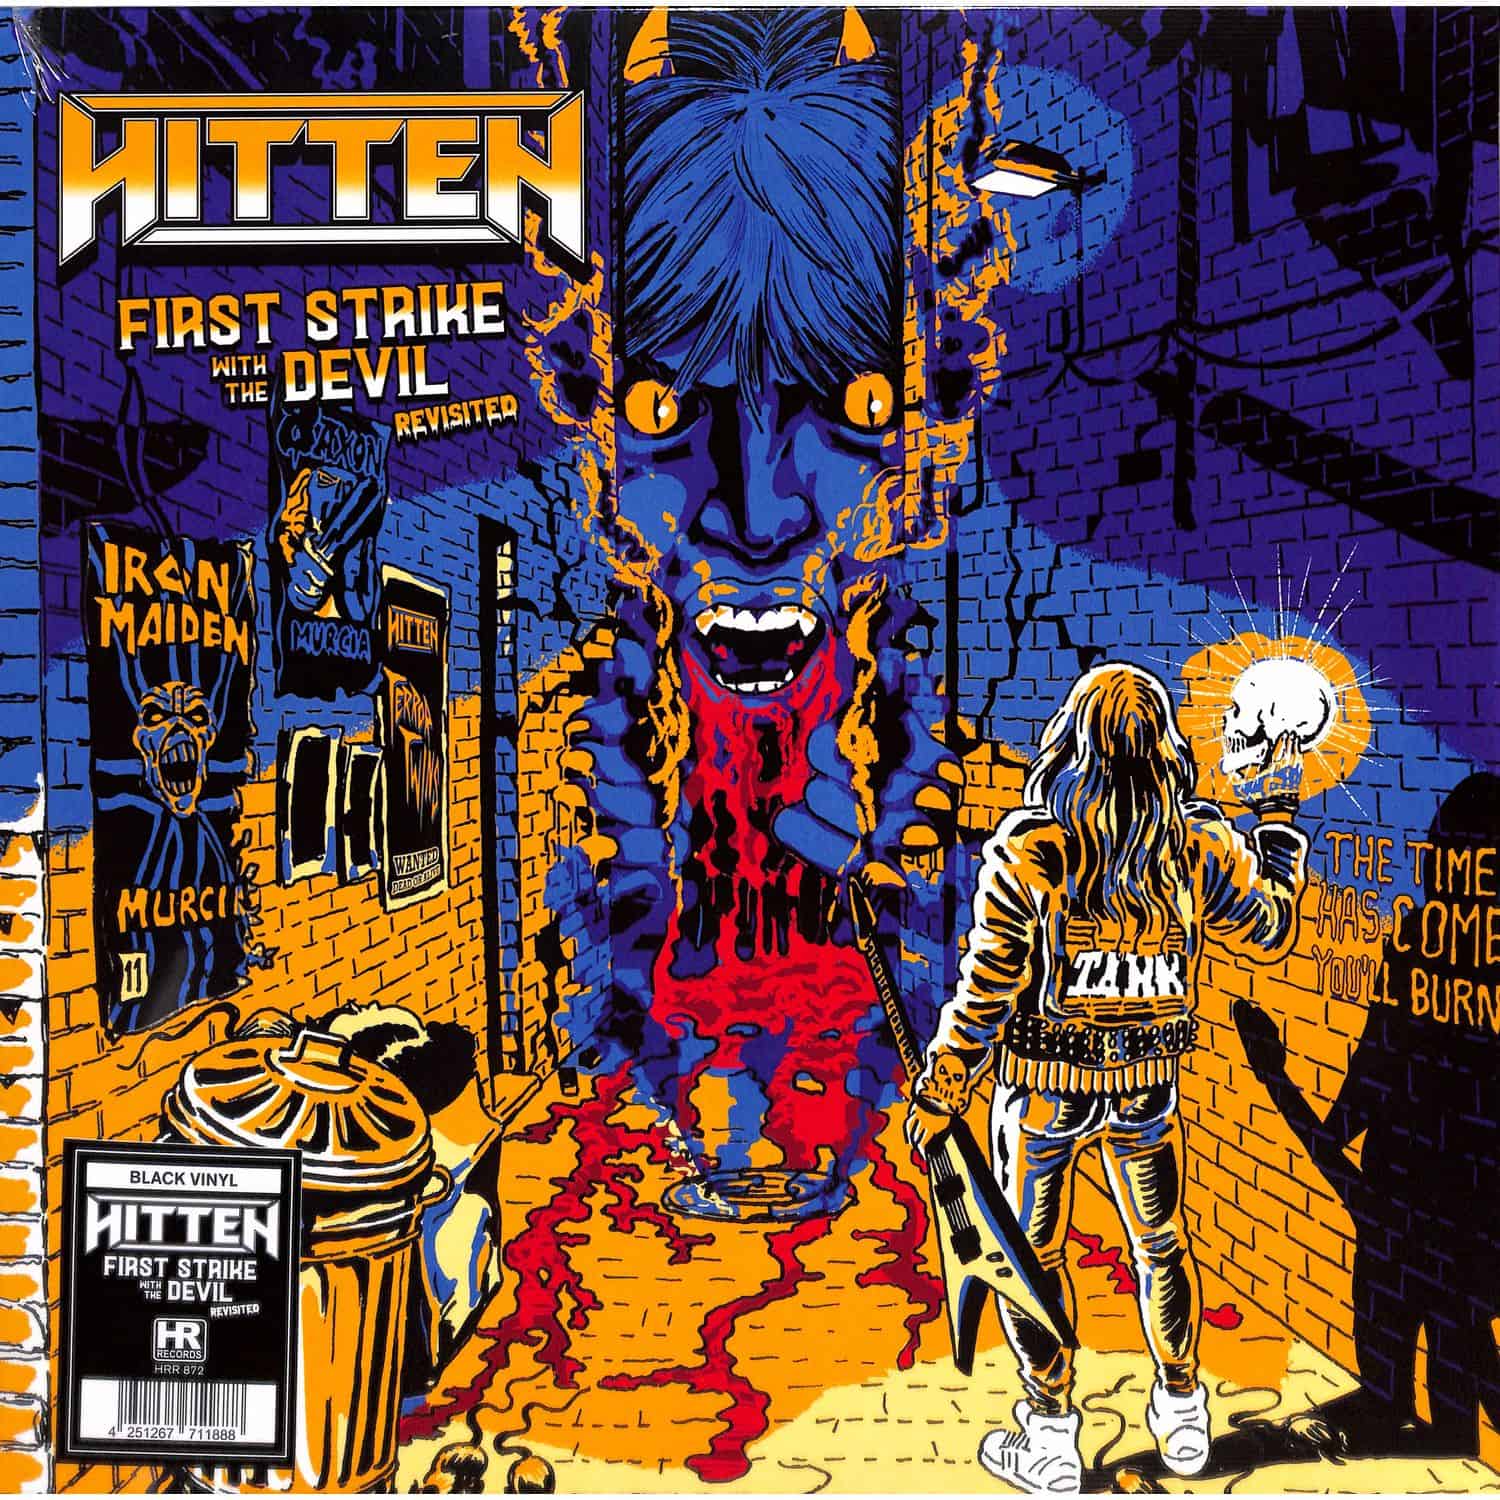 Hitten - FIRST STRIKE WITH THE DEVIL-REVISITED 